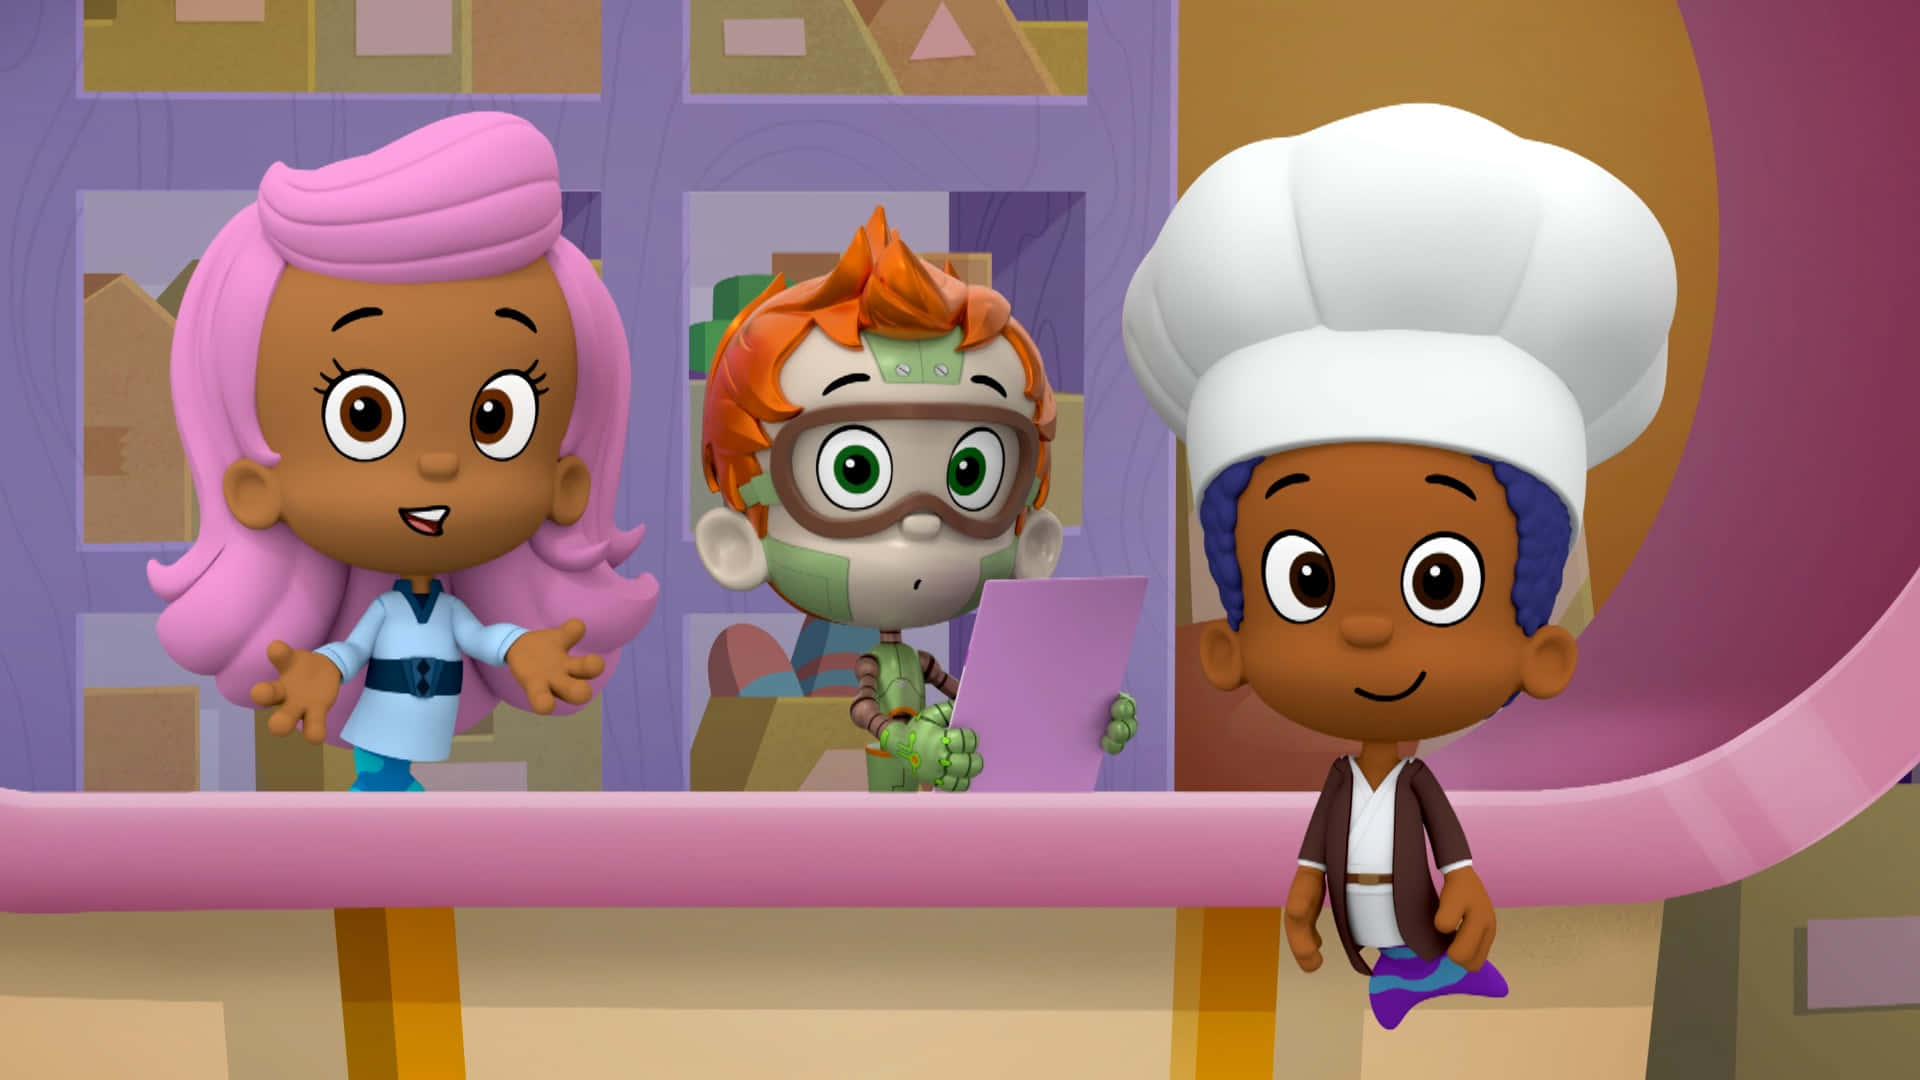 Get Ready to Learn and Play with the Bubble Guppies